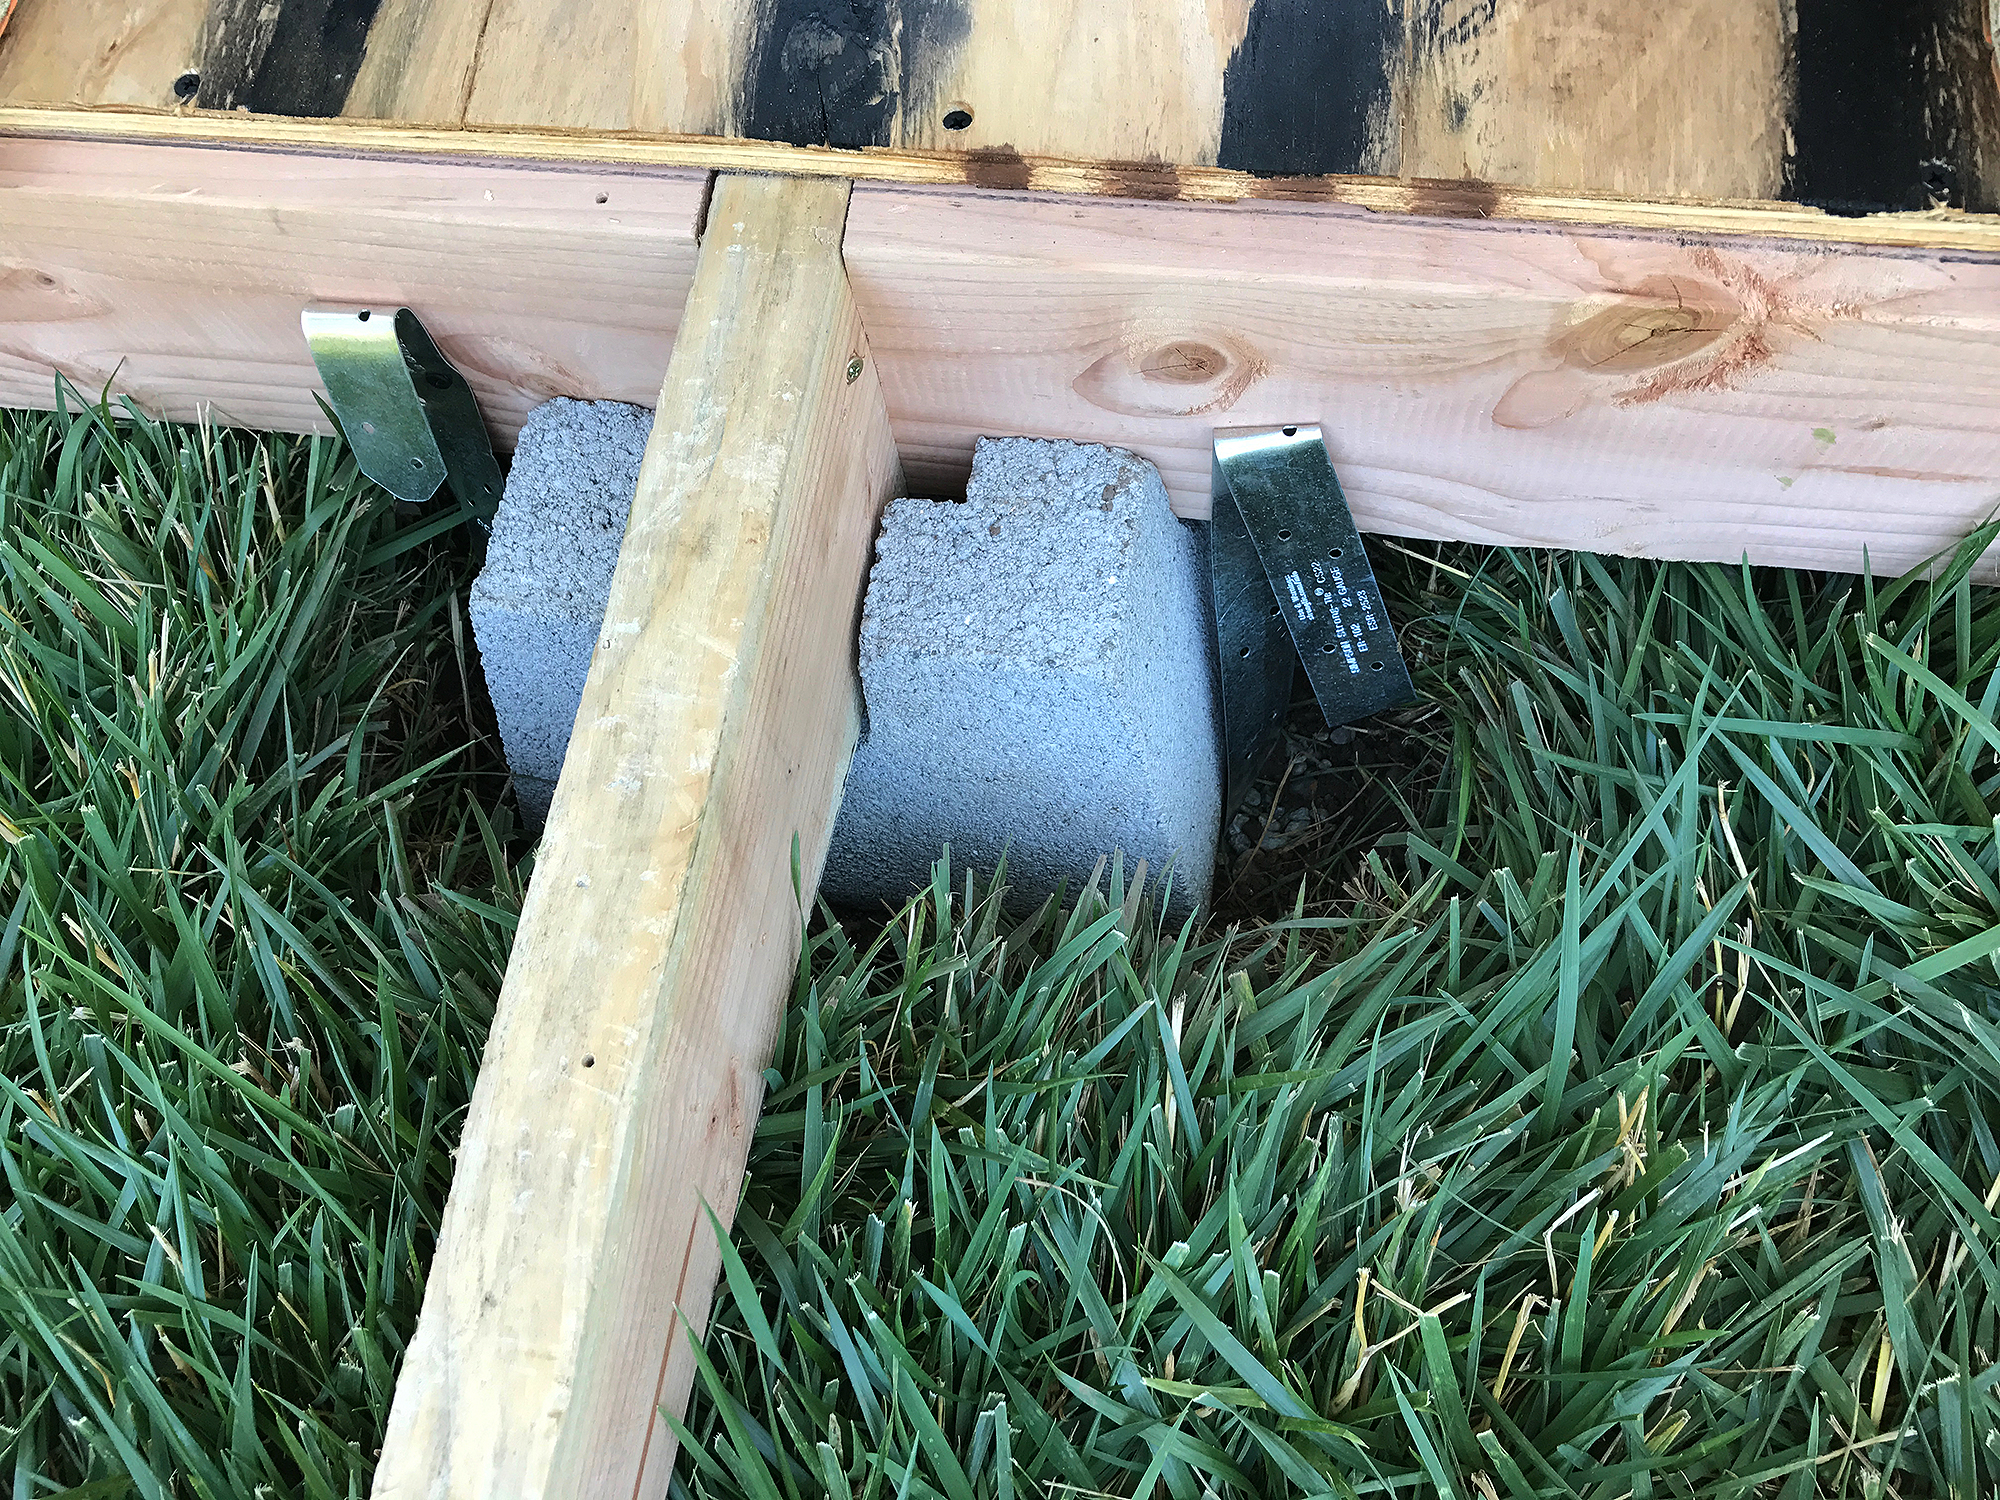 blocks are sunken into the lawn to support the frame